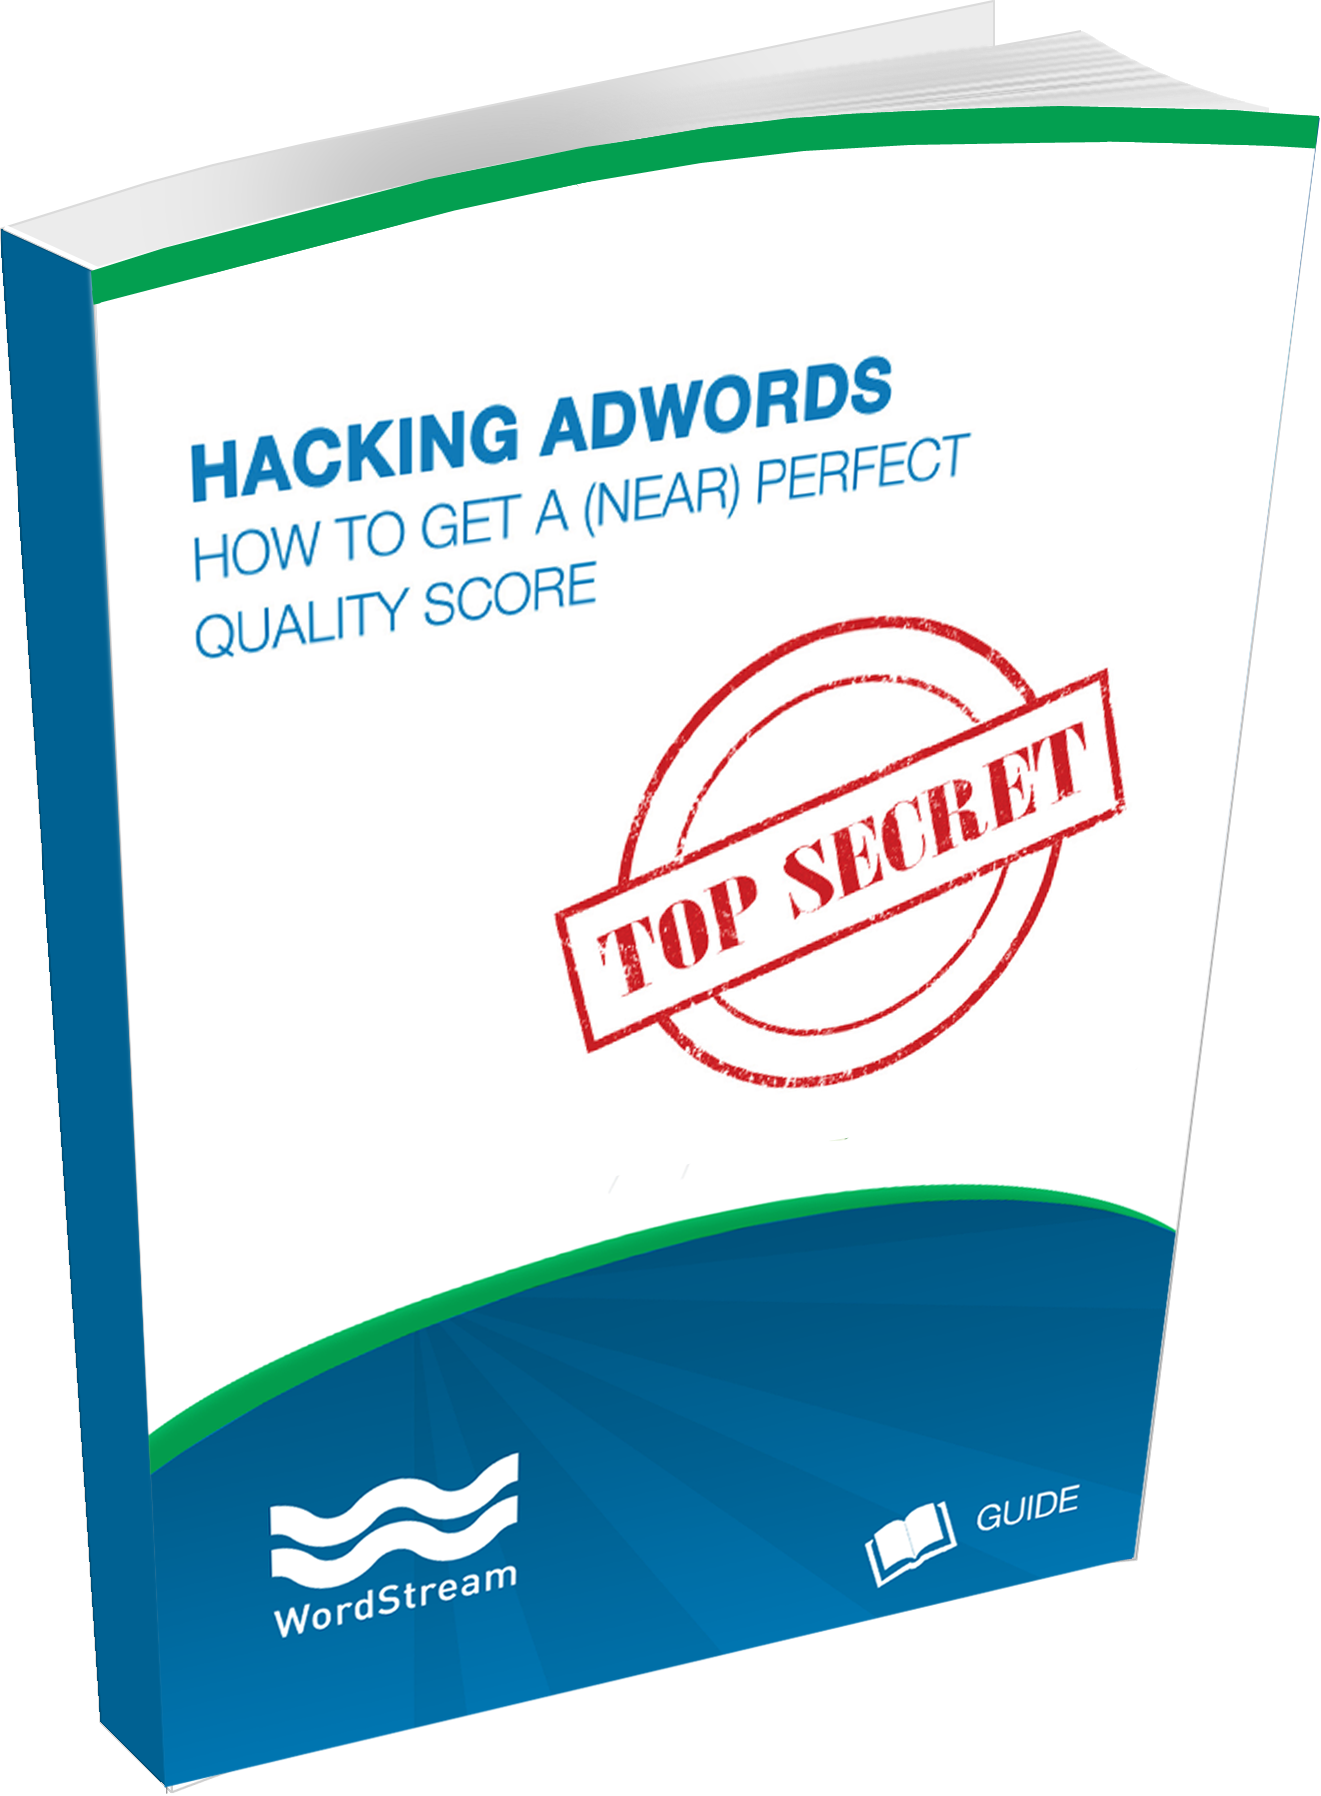 Hacking AdWords: How to Get a (Near) Perfect Quality Score